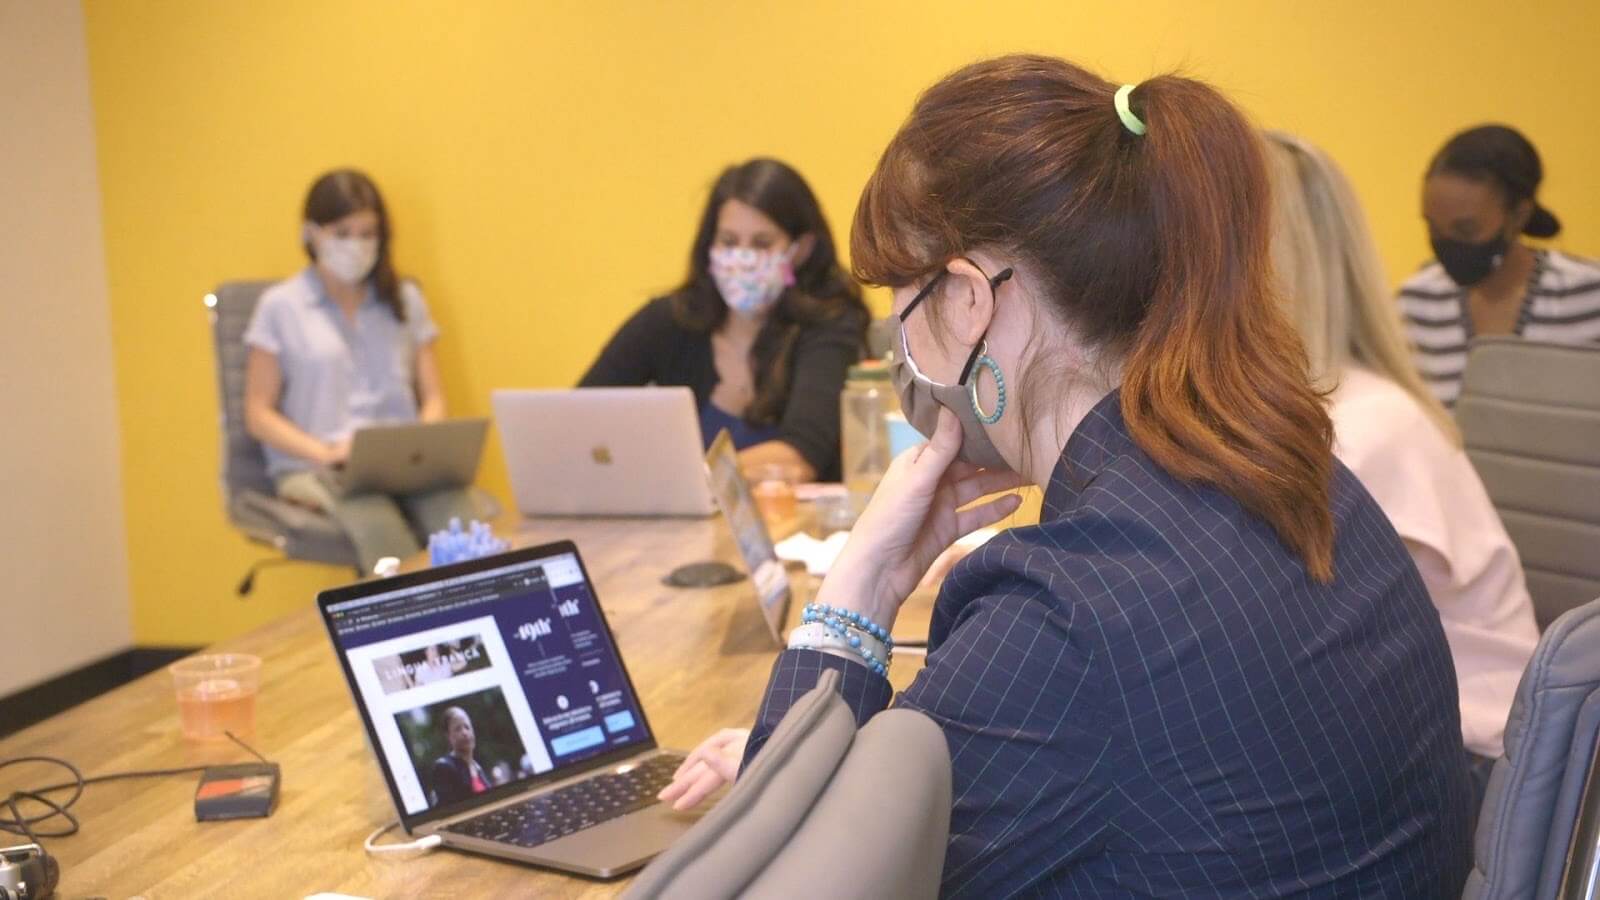 till from The Untitled 19th* News Film. A group of five women reporters sit around a table with masks on and laptops open to the 19th News digital website. The woman closest to the camera has her hand up to her mask.